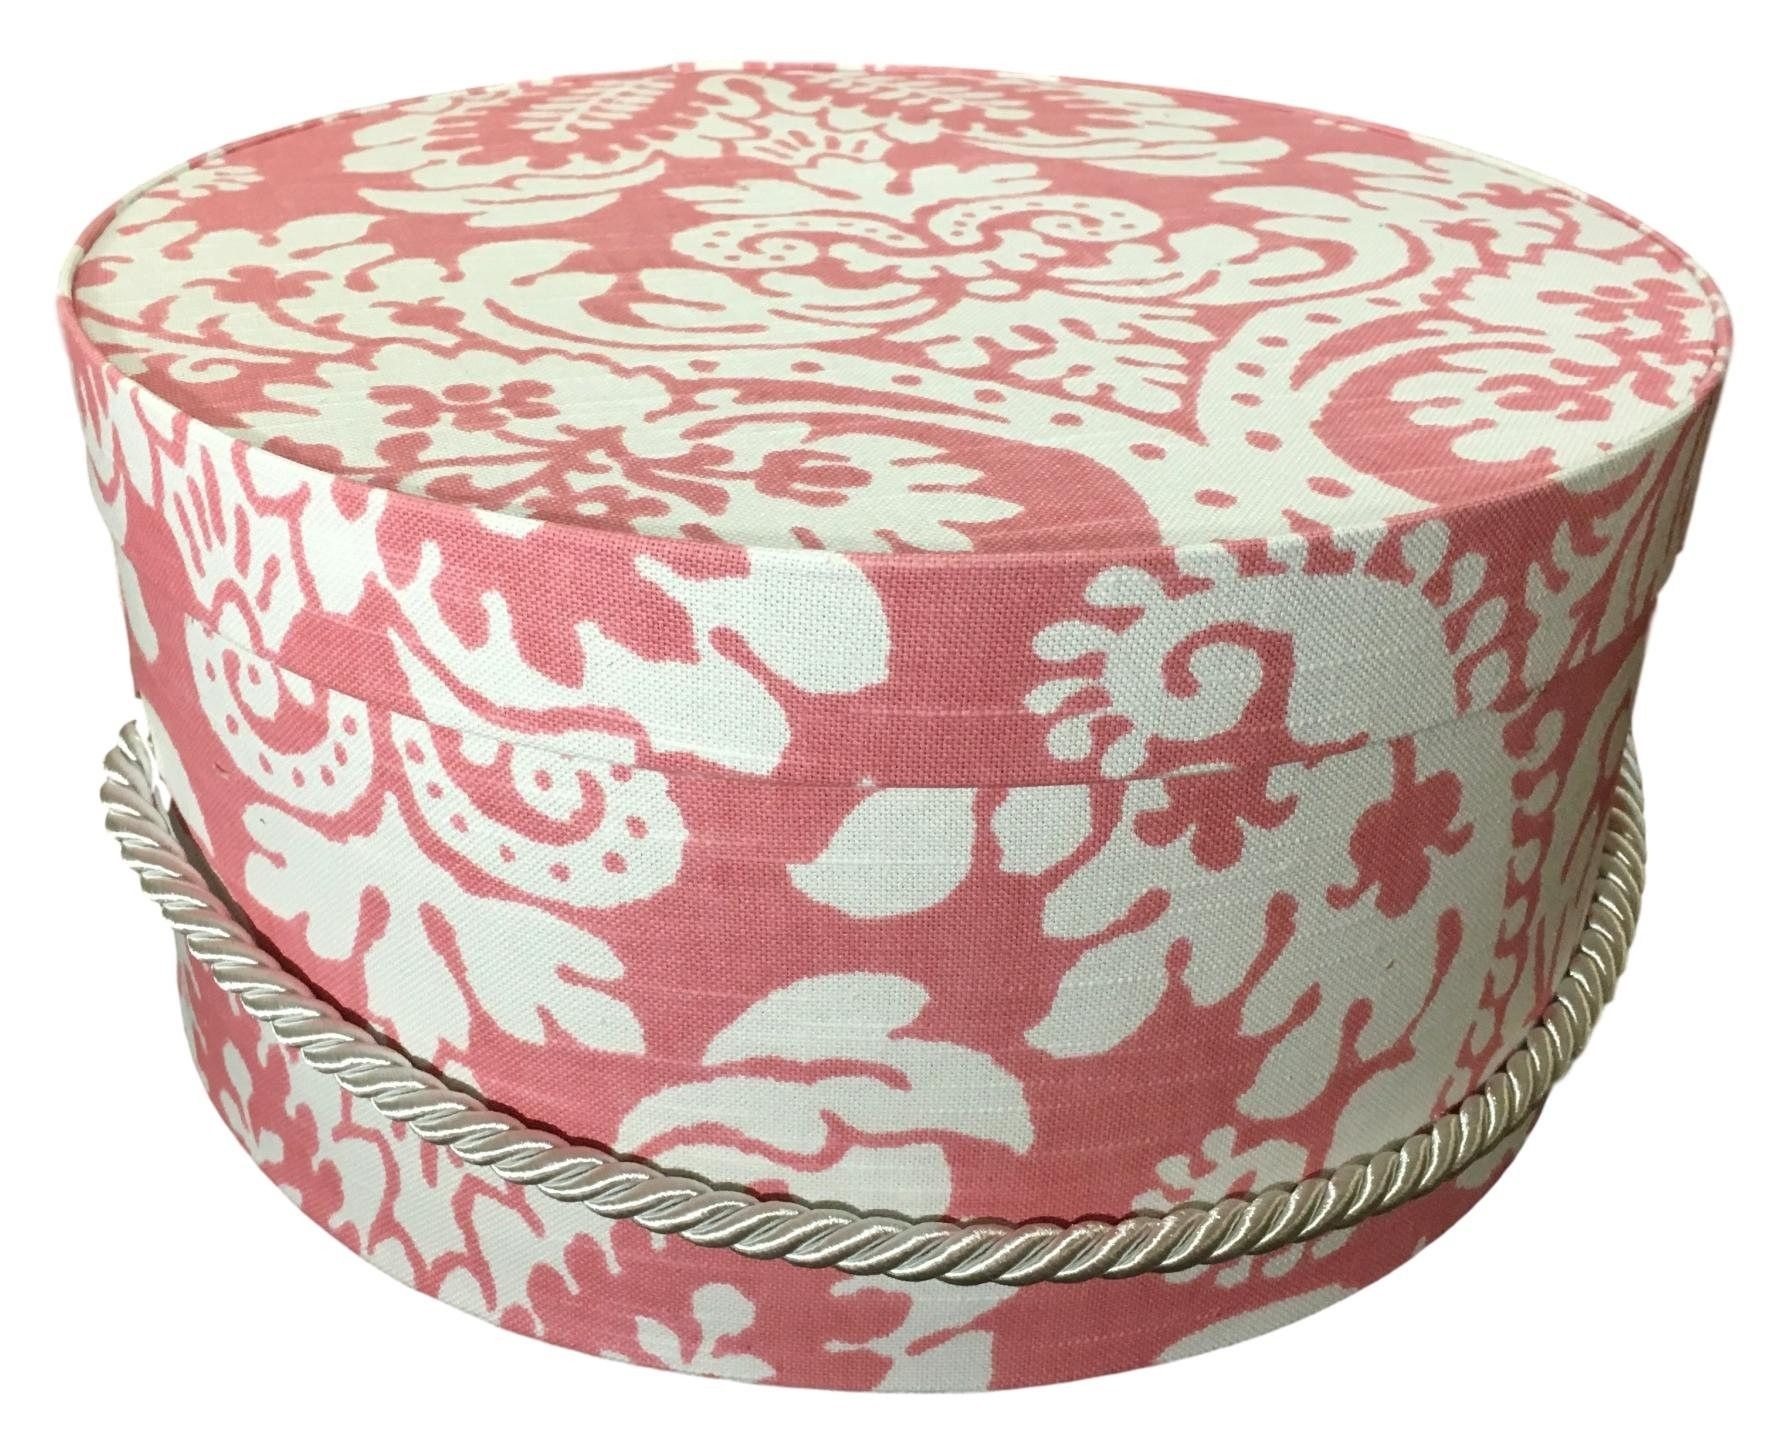 Hat box raspberry floral large decorative fabric covered